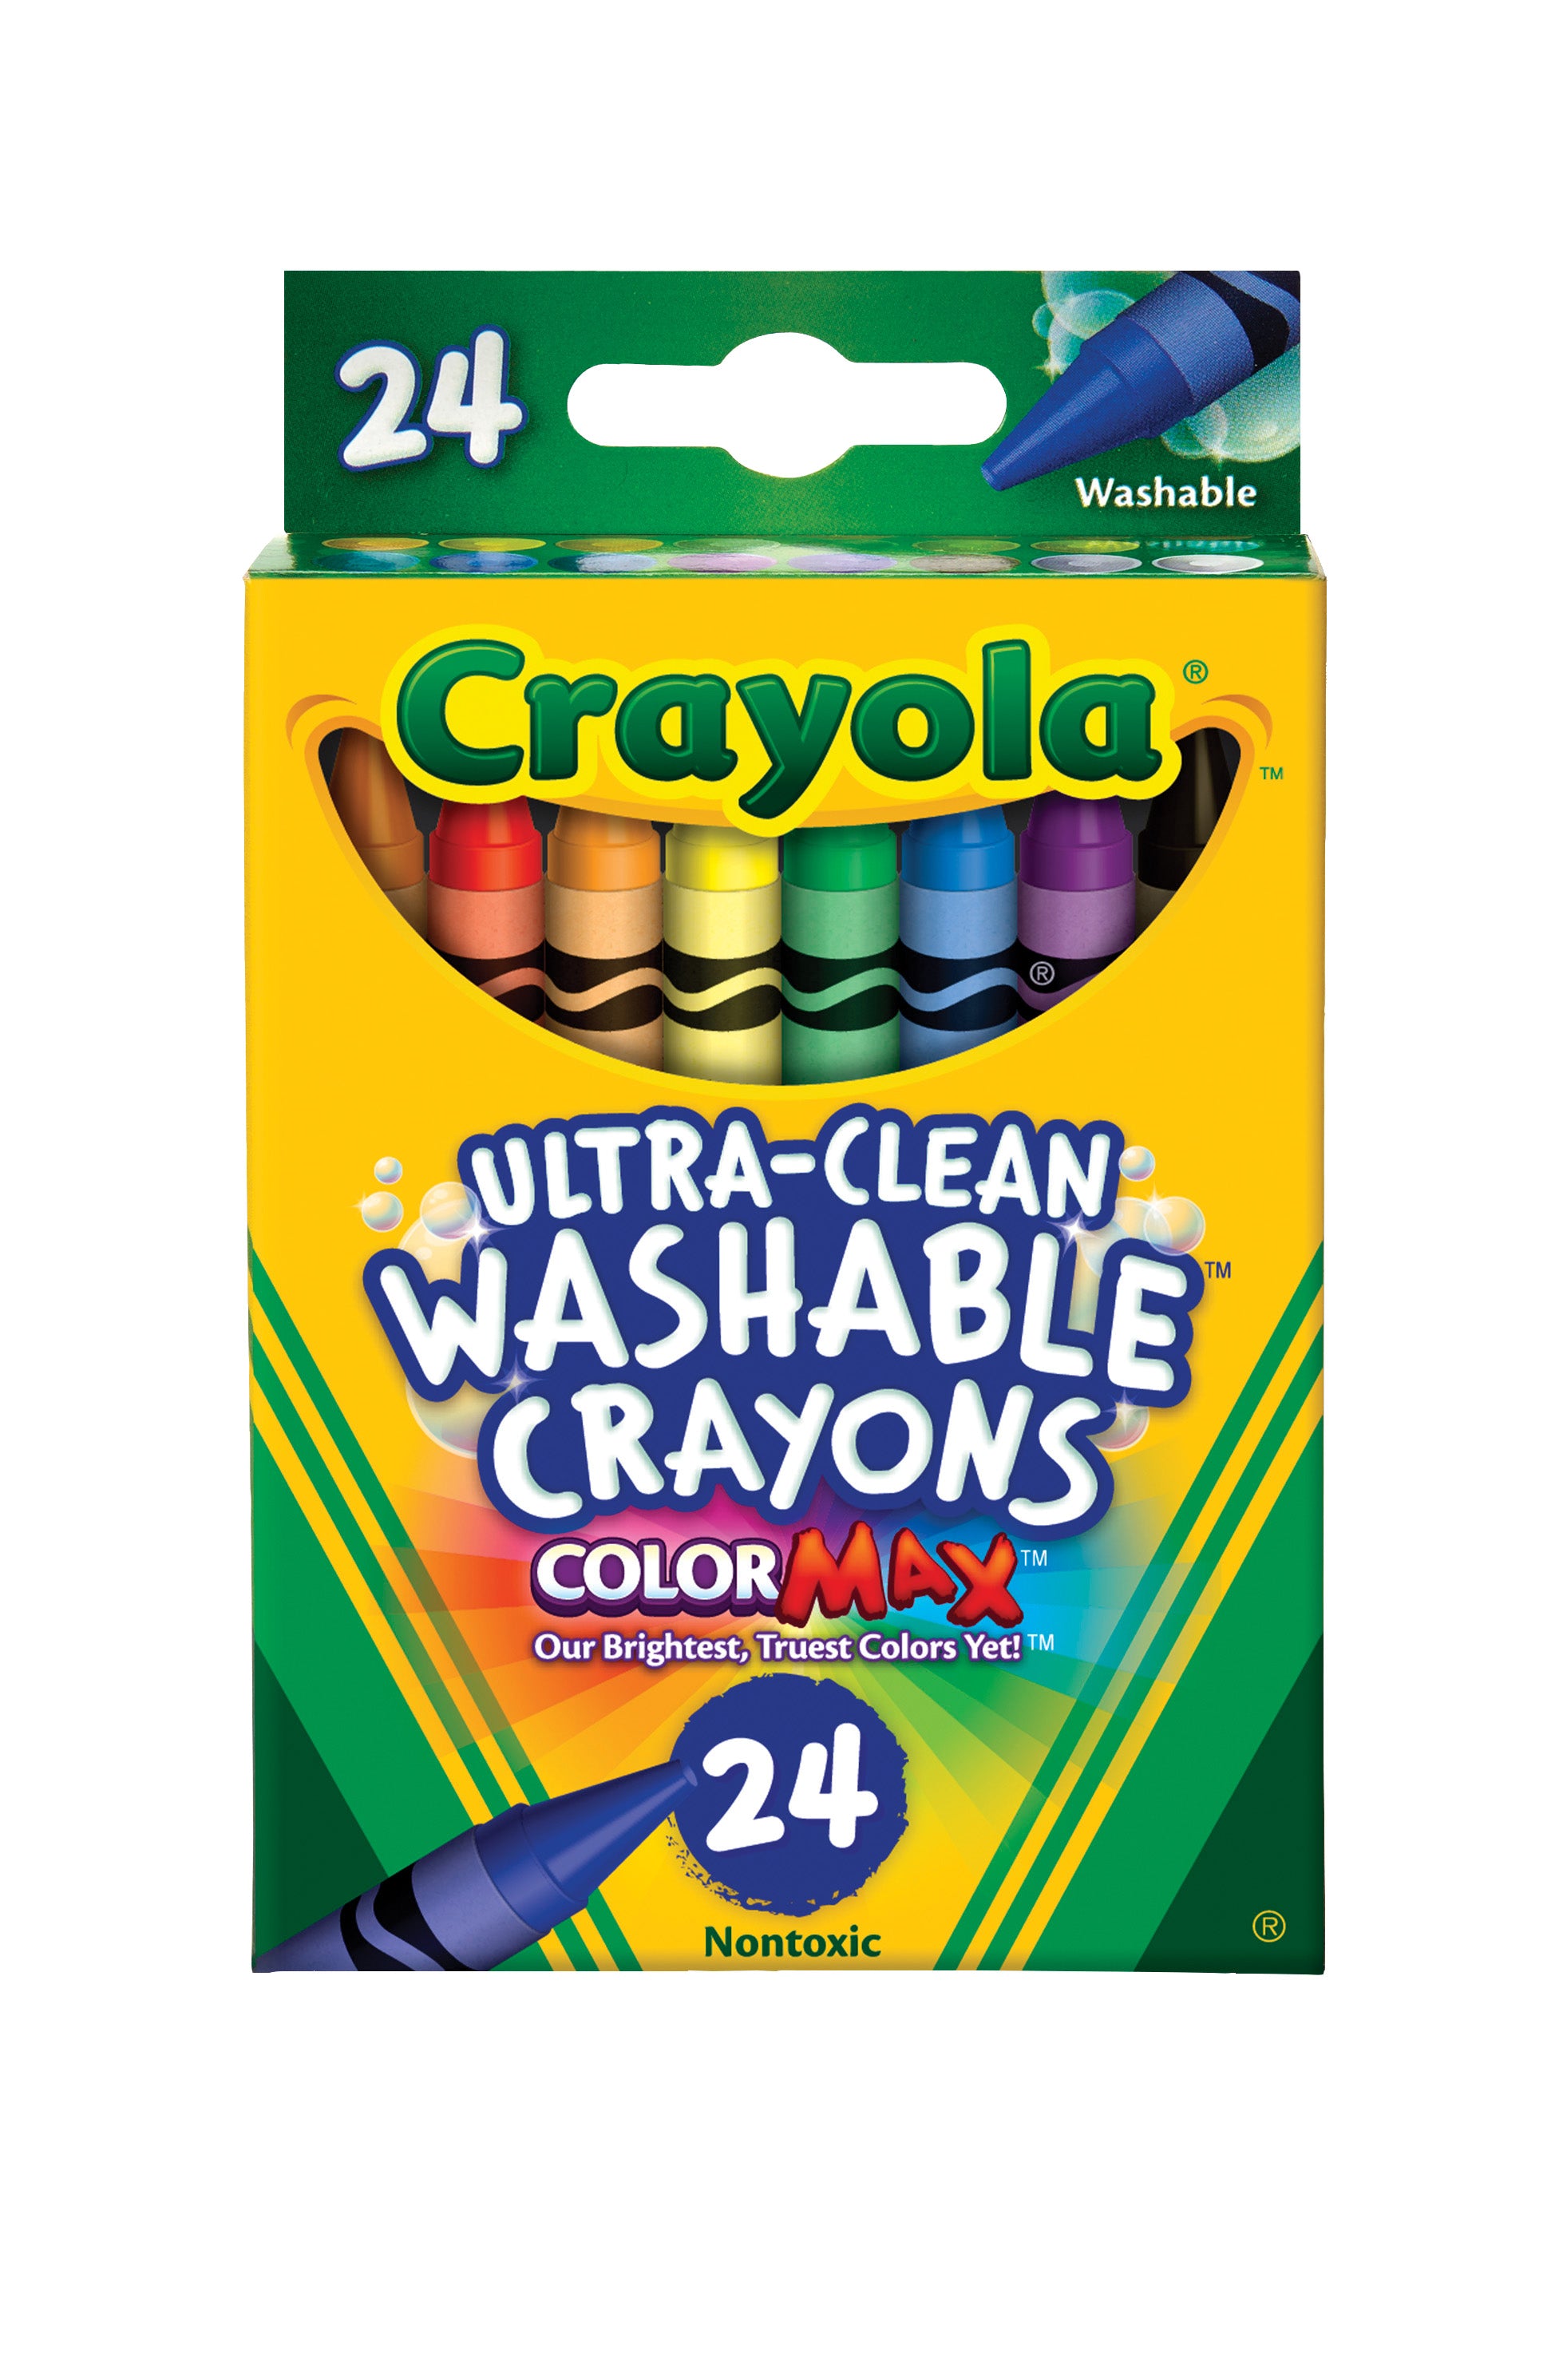 Crayola Ultra-Clean Washable Crayons - 24 Colors